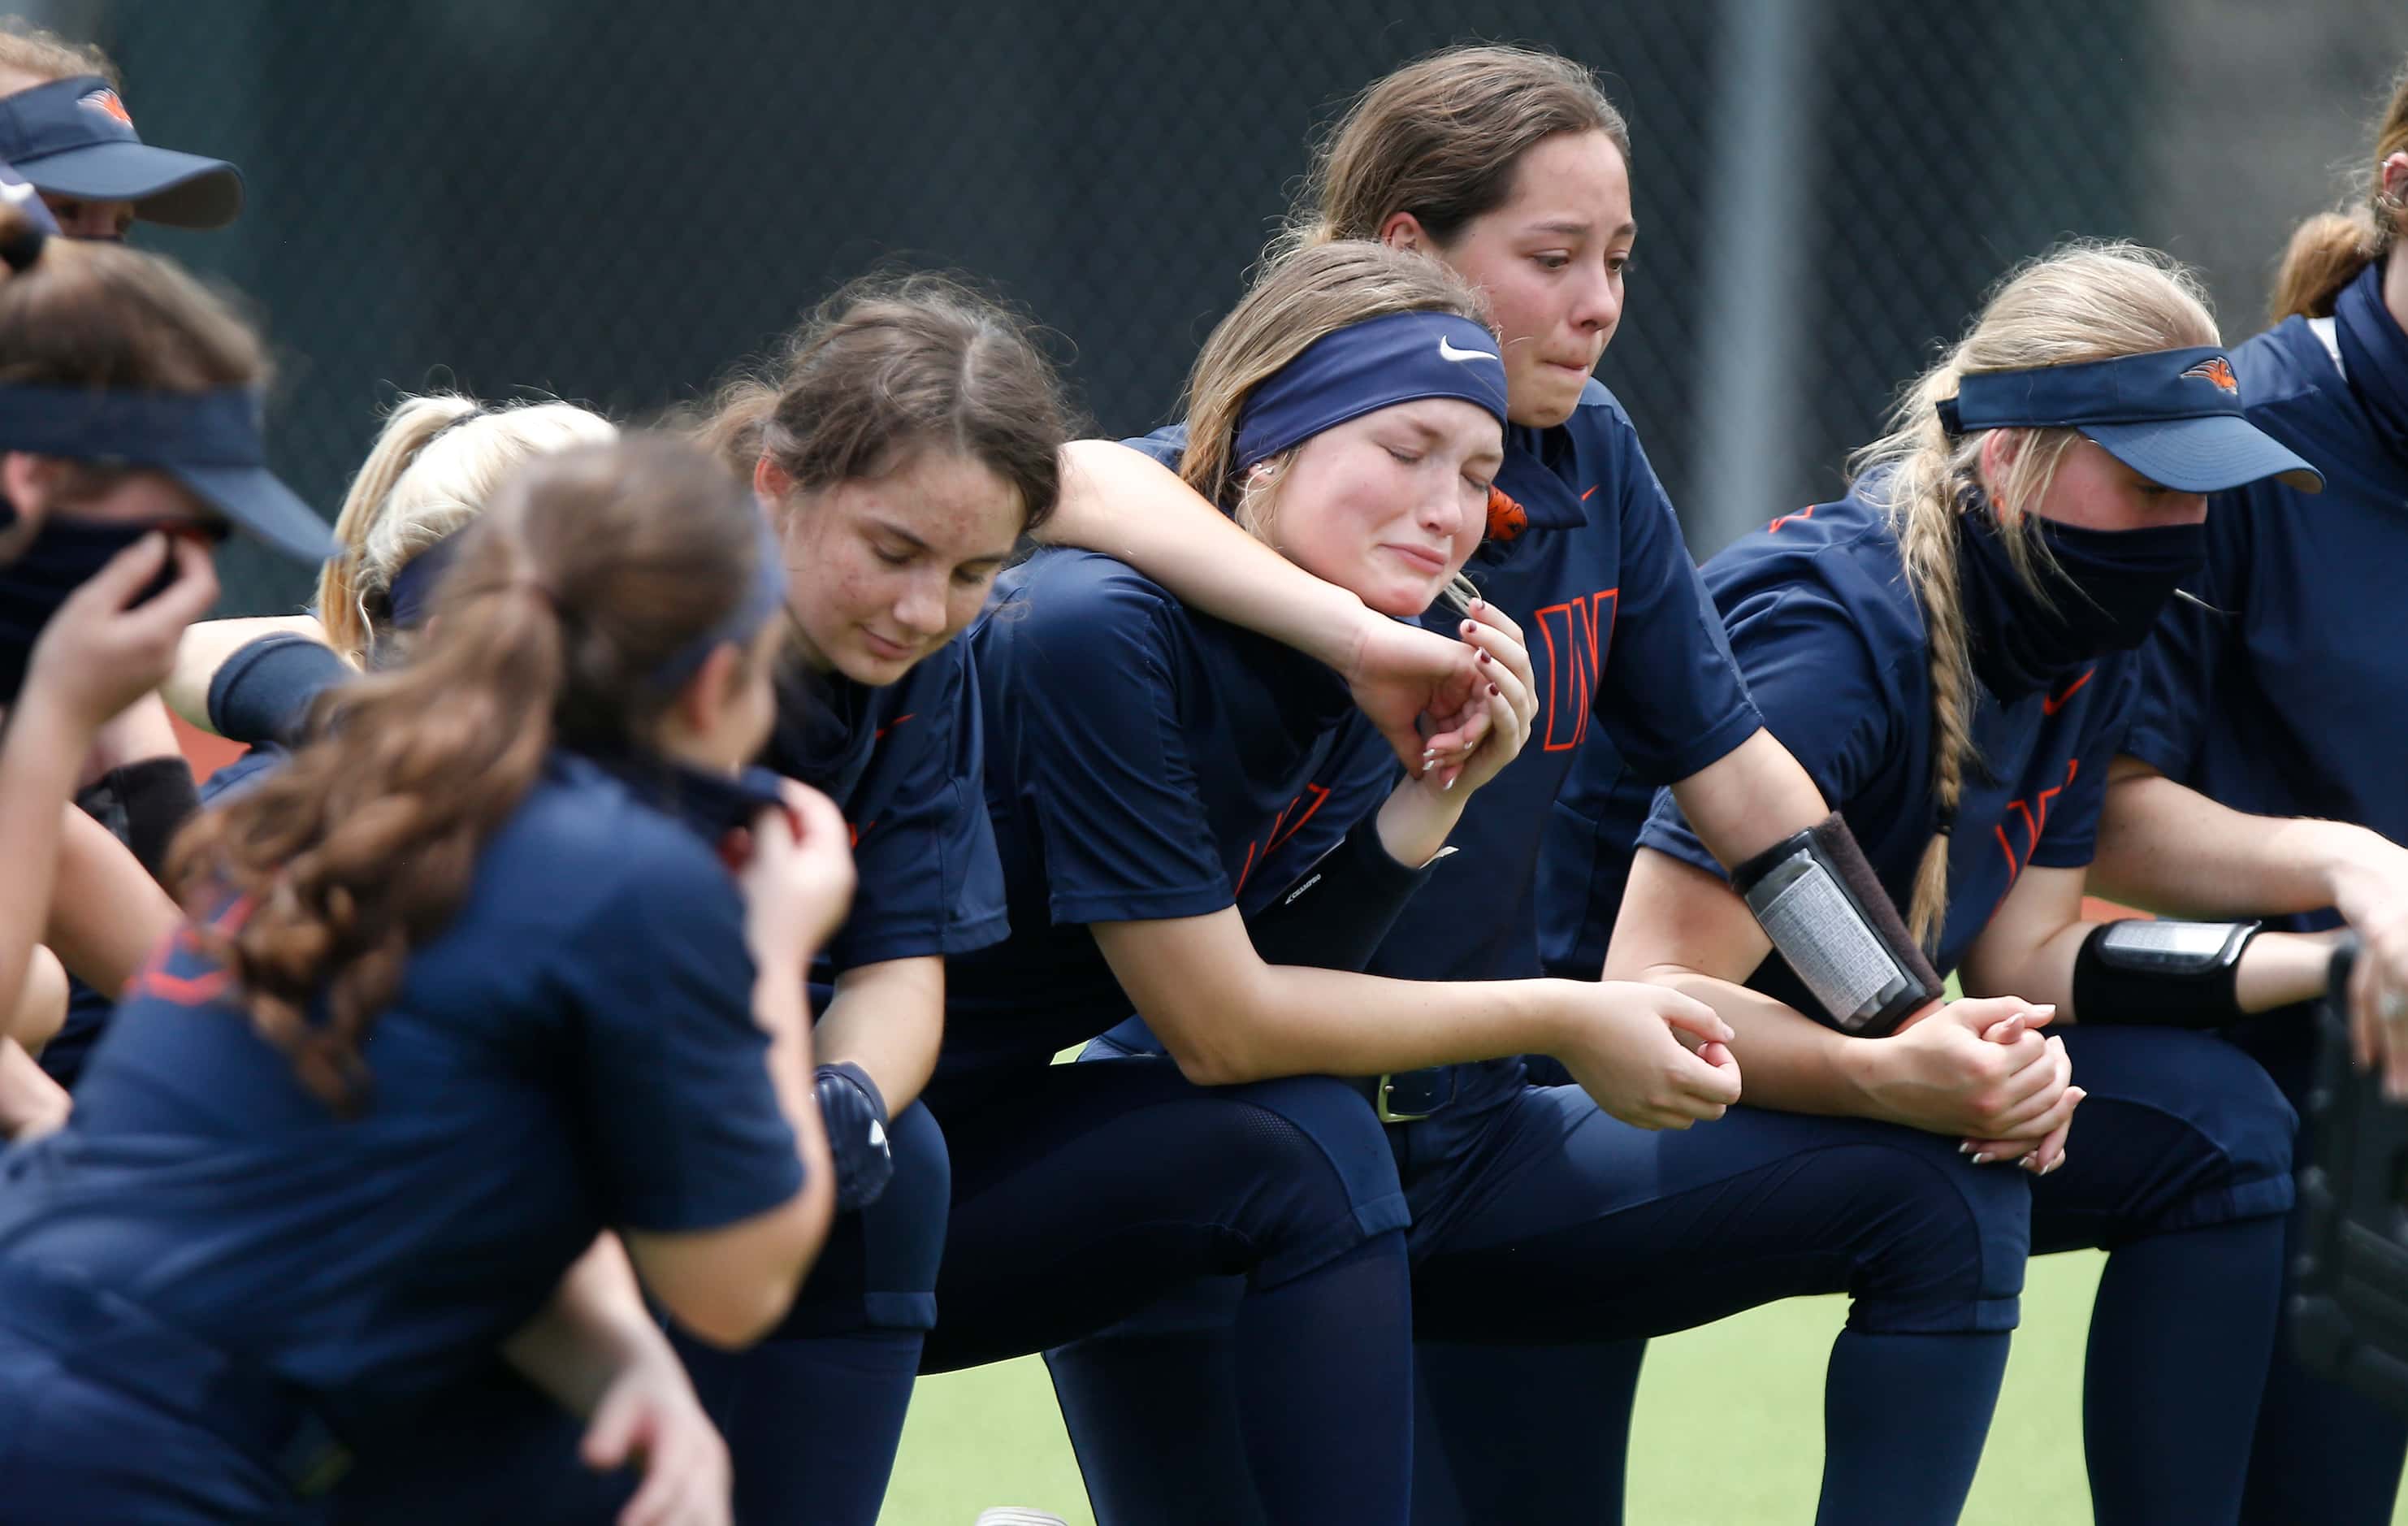 The Wakeland season comes to an end as second baseman McKinley Hopkins and shortstop Lily...